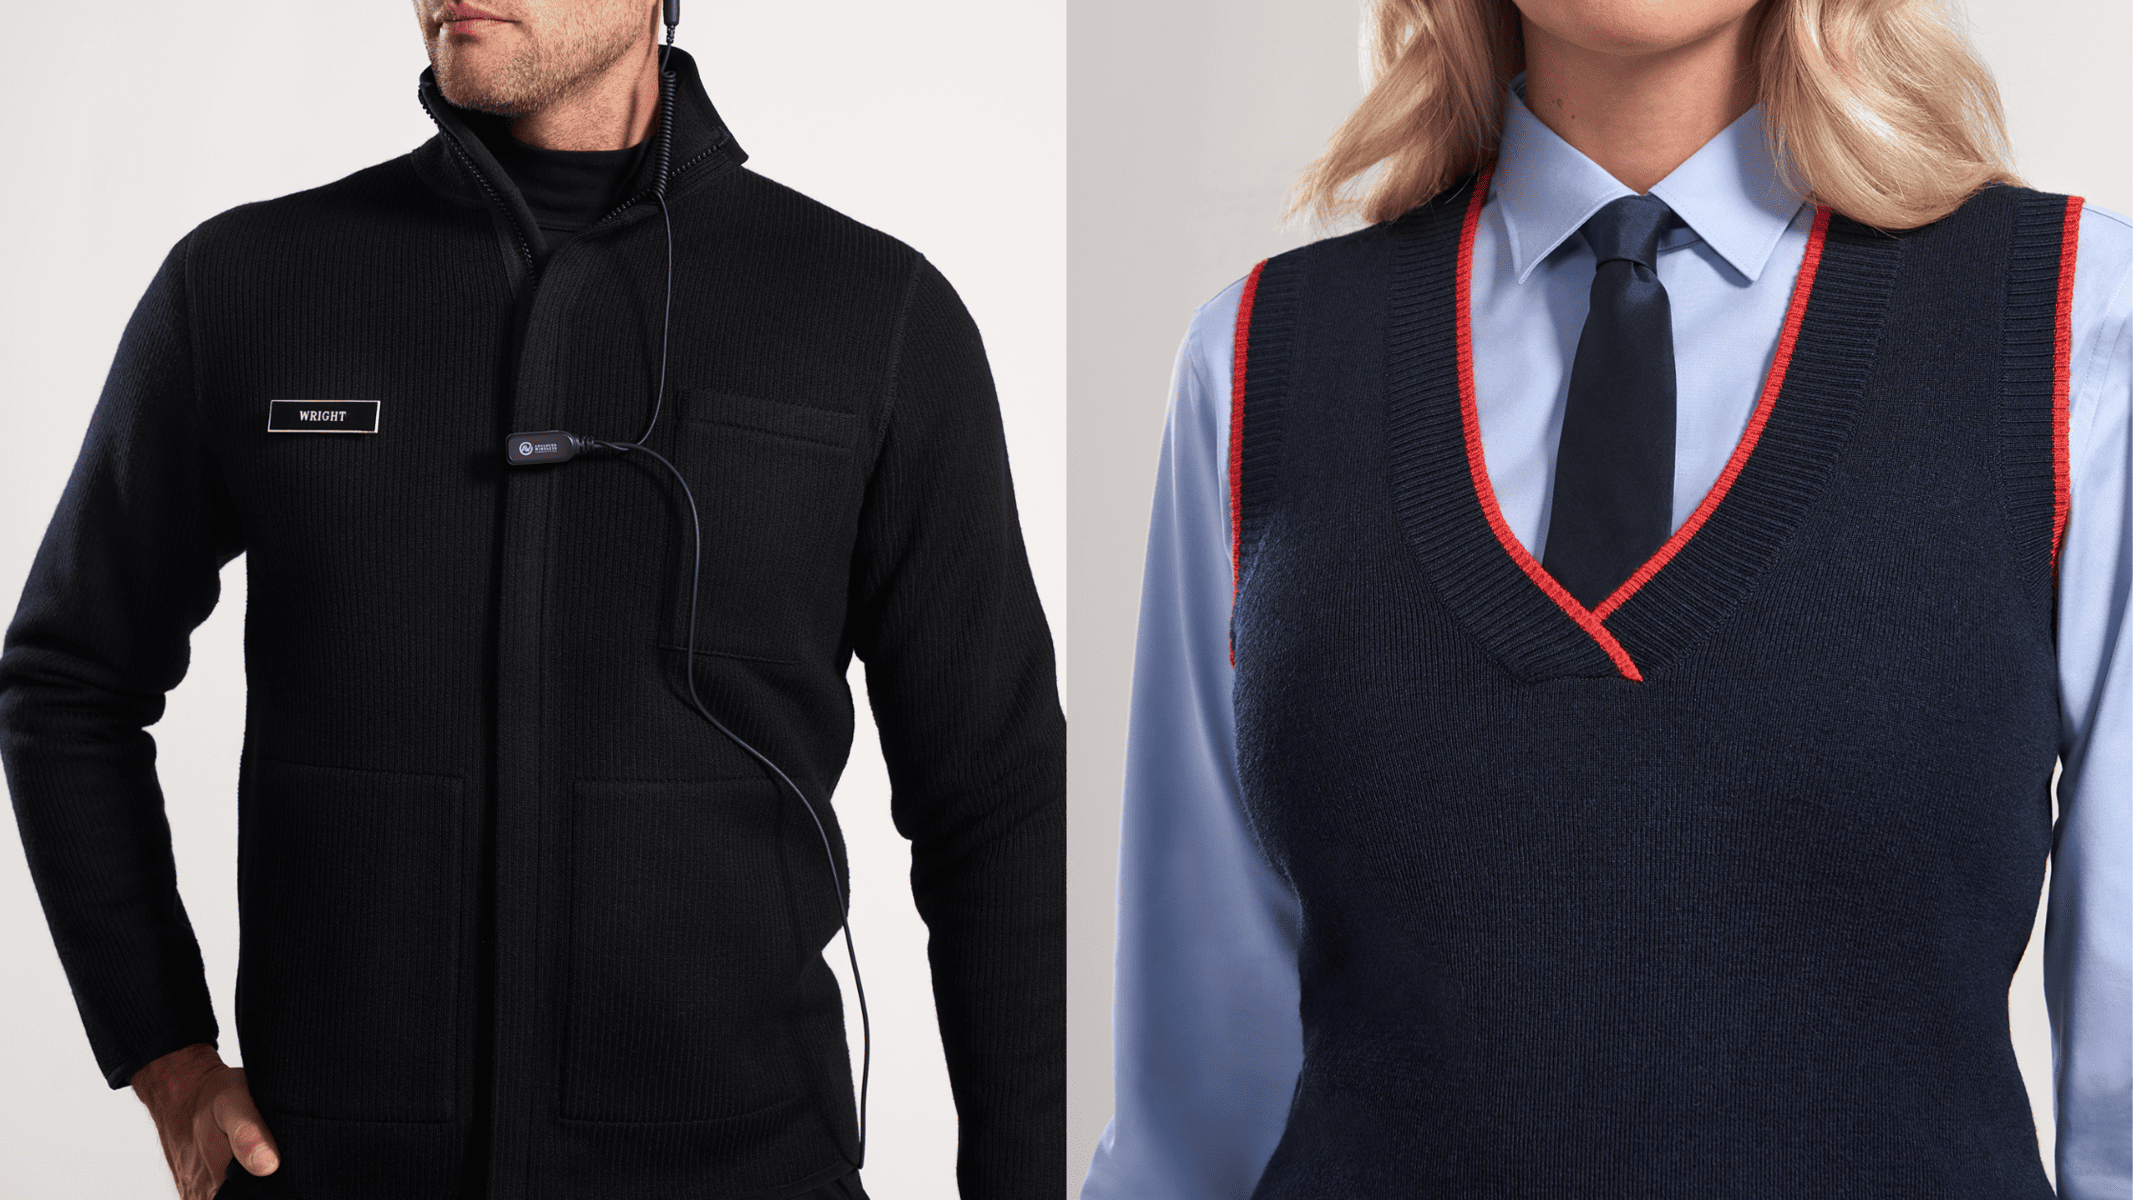 Public Safety and Corporate Uniform Sweaters